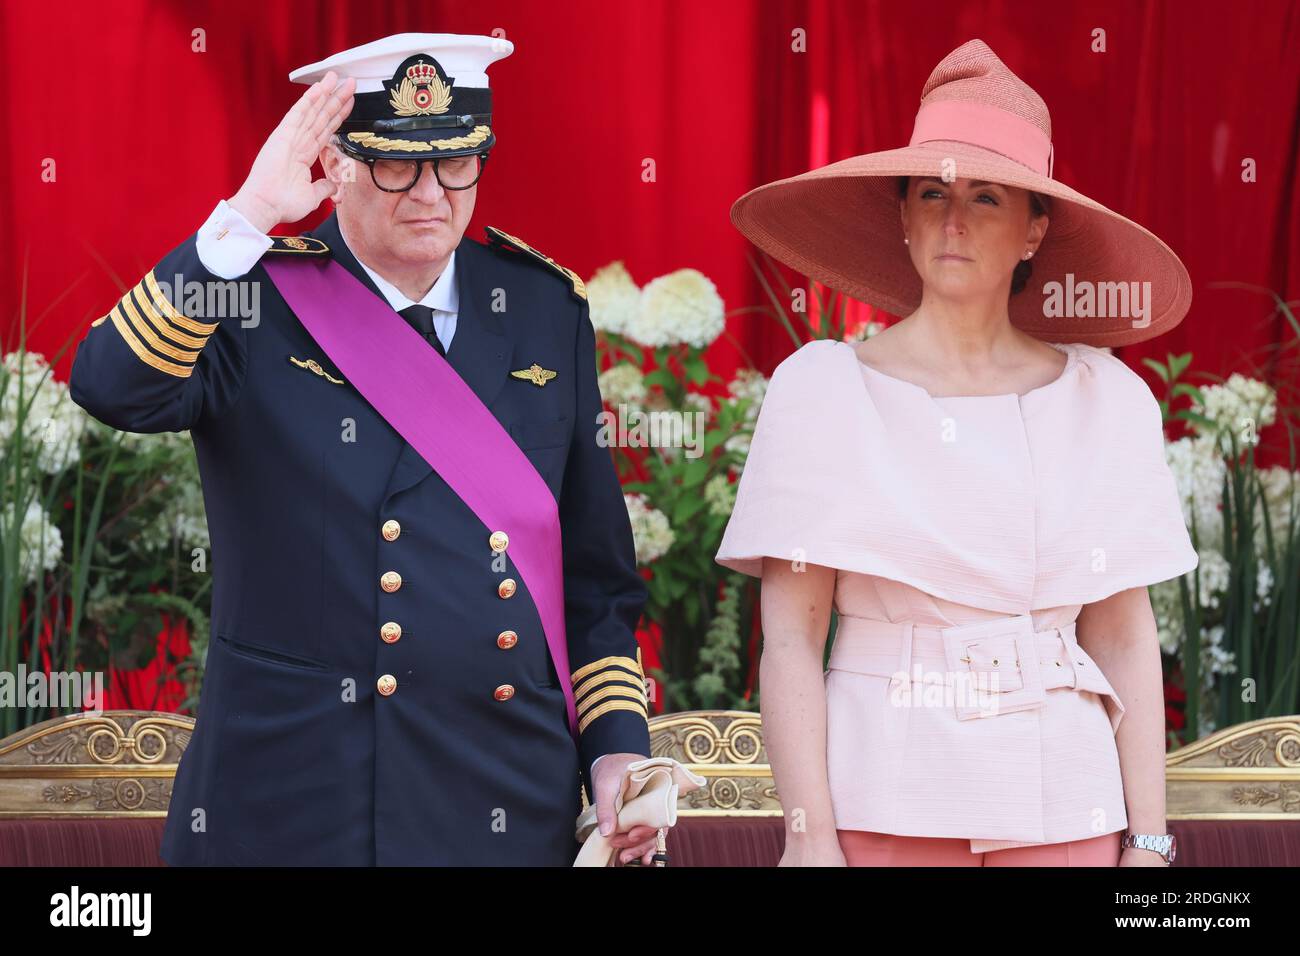 Belgian Prince Laurent (L) is pictured with Princess Claire (R) and her  daughter Princess Louise on the podium during the military parade on the  occasion of Belgium?s National Day in Brussels, Belgium